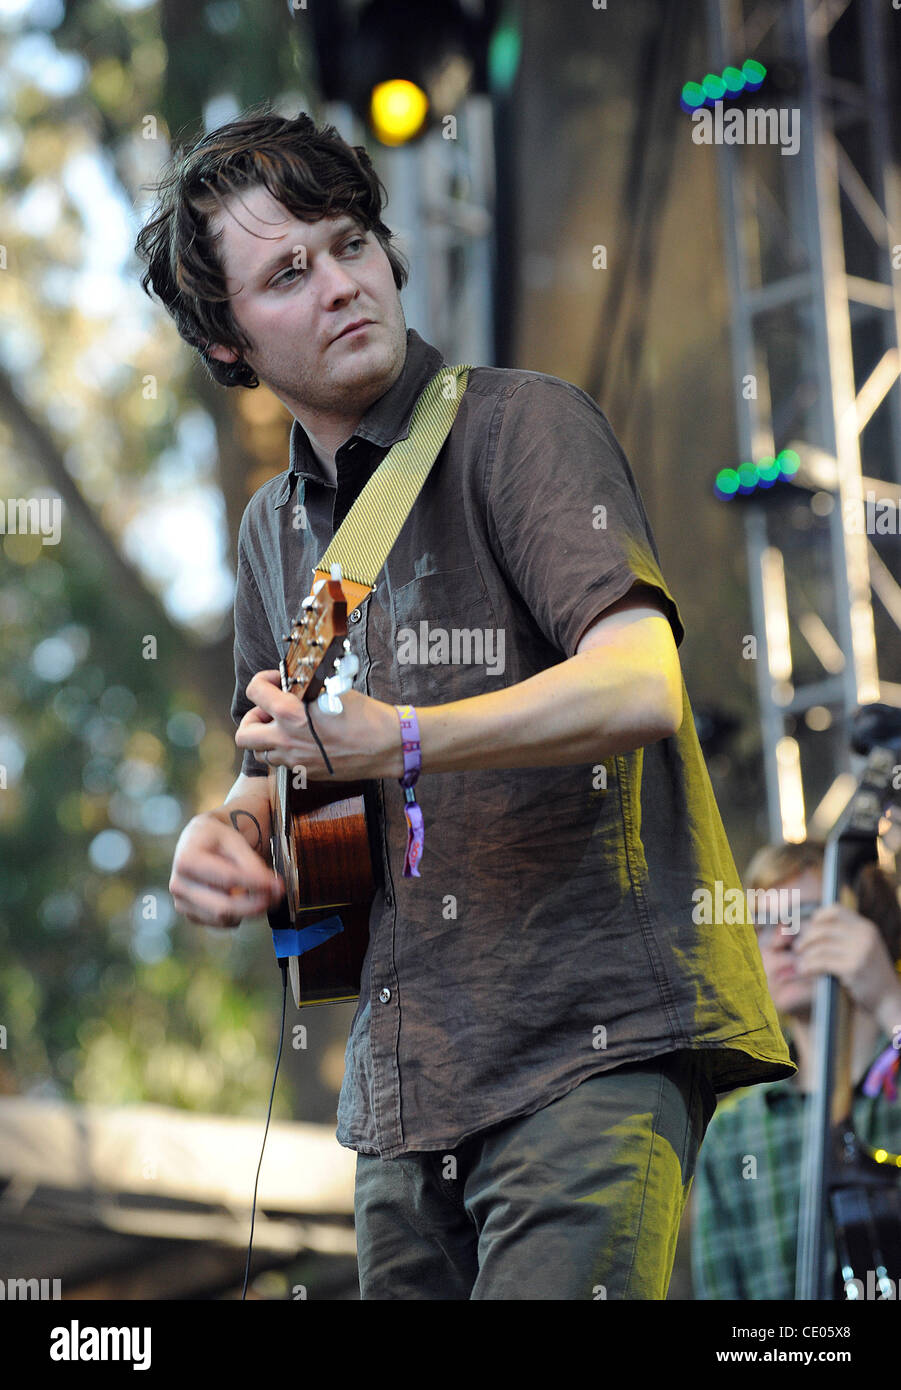 Aug 14, 2011 - San Francisco, California; USA - Musician ZACH CONDON of the  band Beirut performs live as part of the 2011 Outside Lands Music Festival  that is taking place at